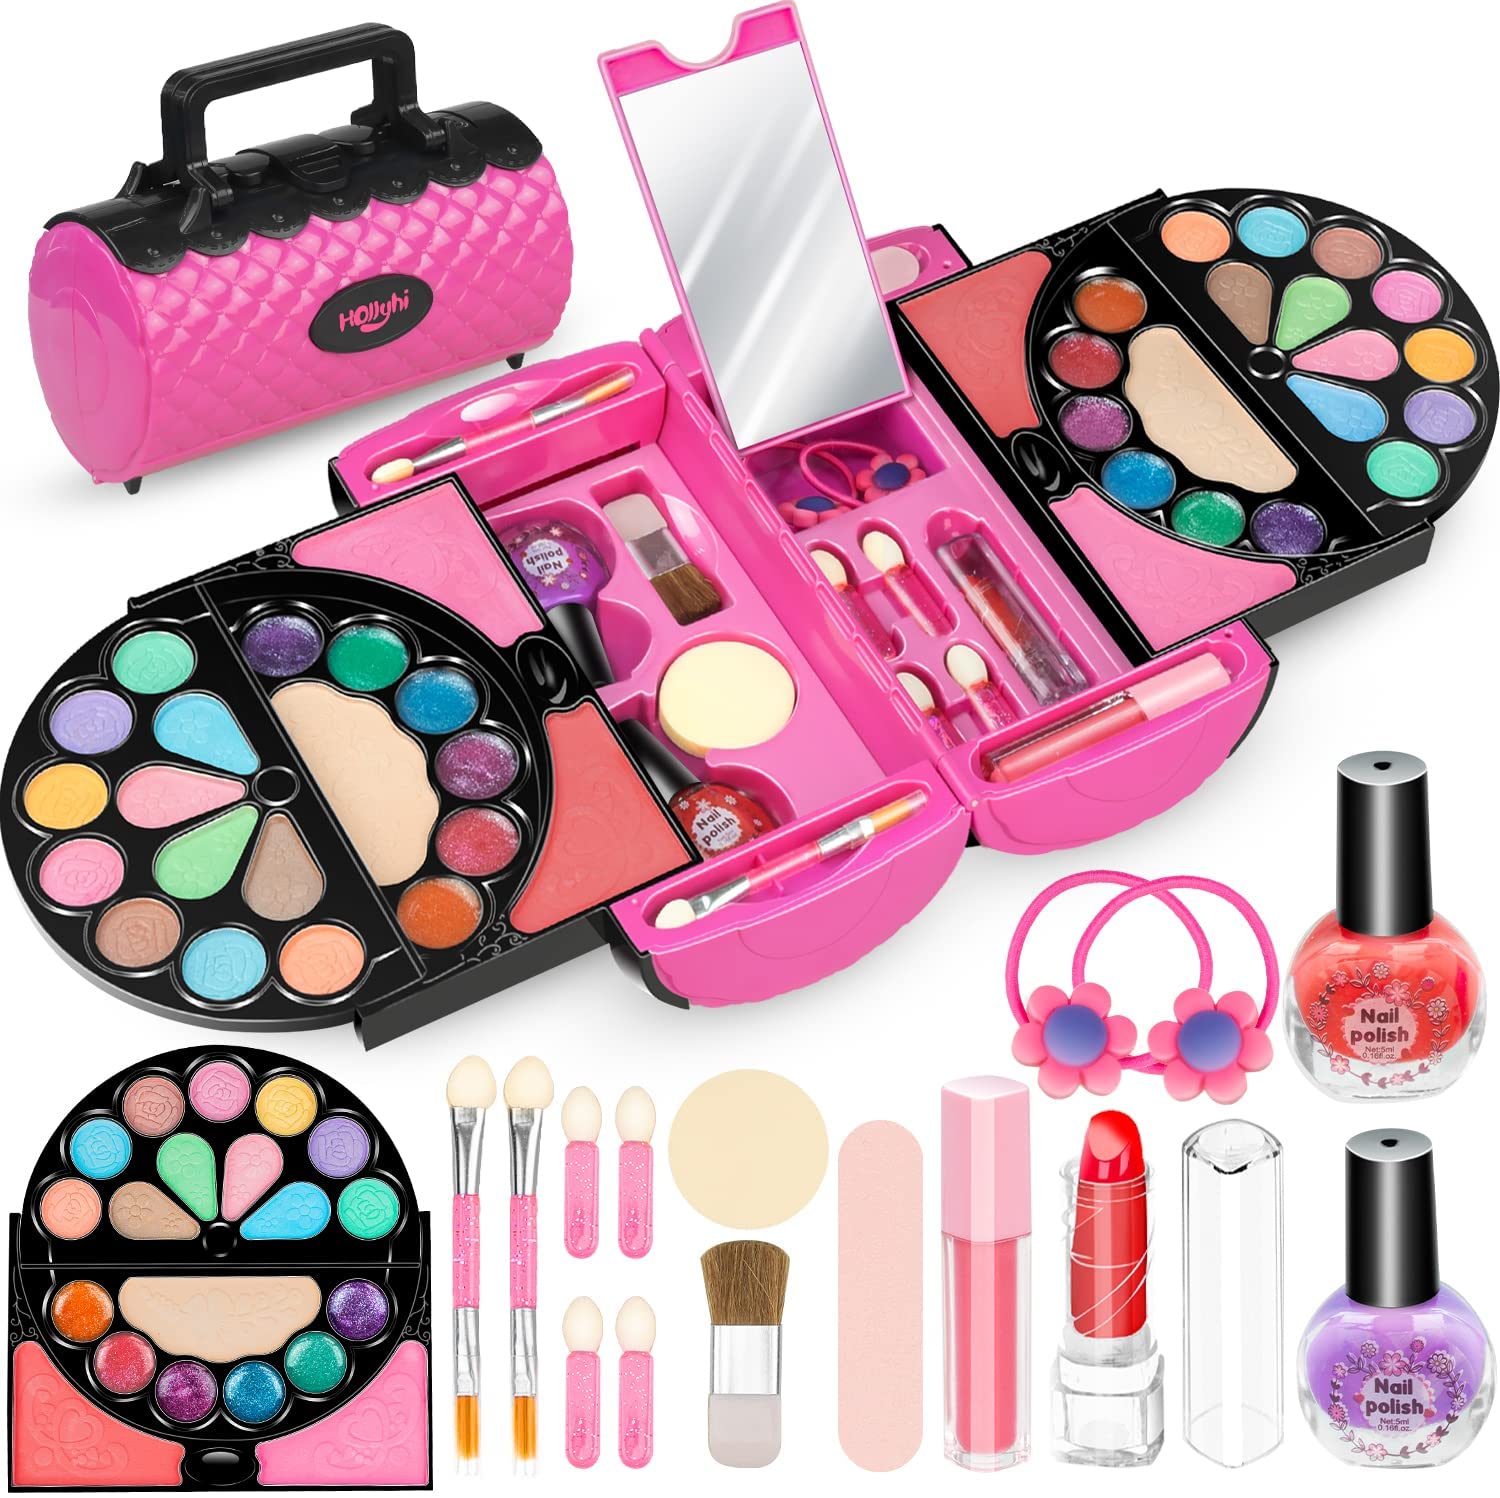  Kids Makeup Kit Girl Toys - Kids Makeup Kit Toys for Girls  Unicorns Washable Make Up Little Girls, Child Real Makeup Set, Non Toxic  Toddlers Cosmetic Kits, Age 3-12 Year Old